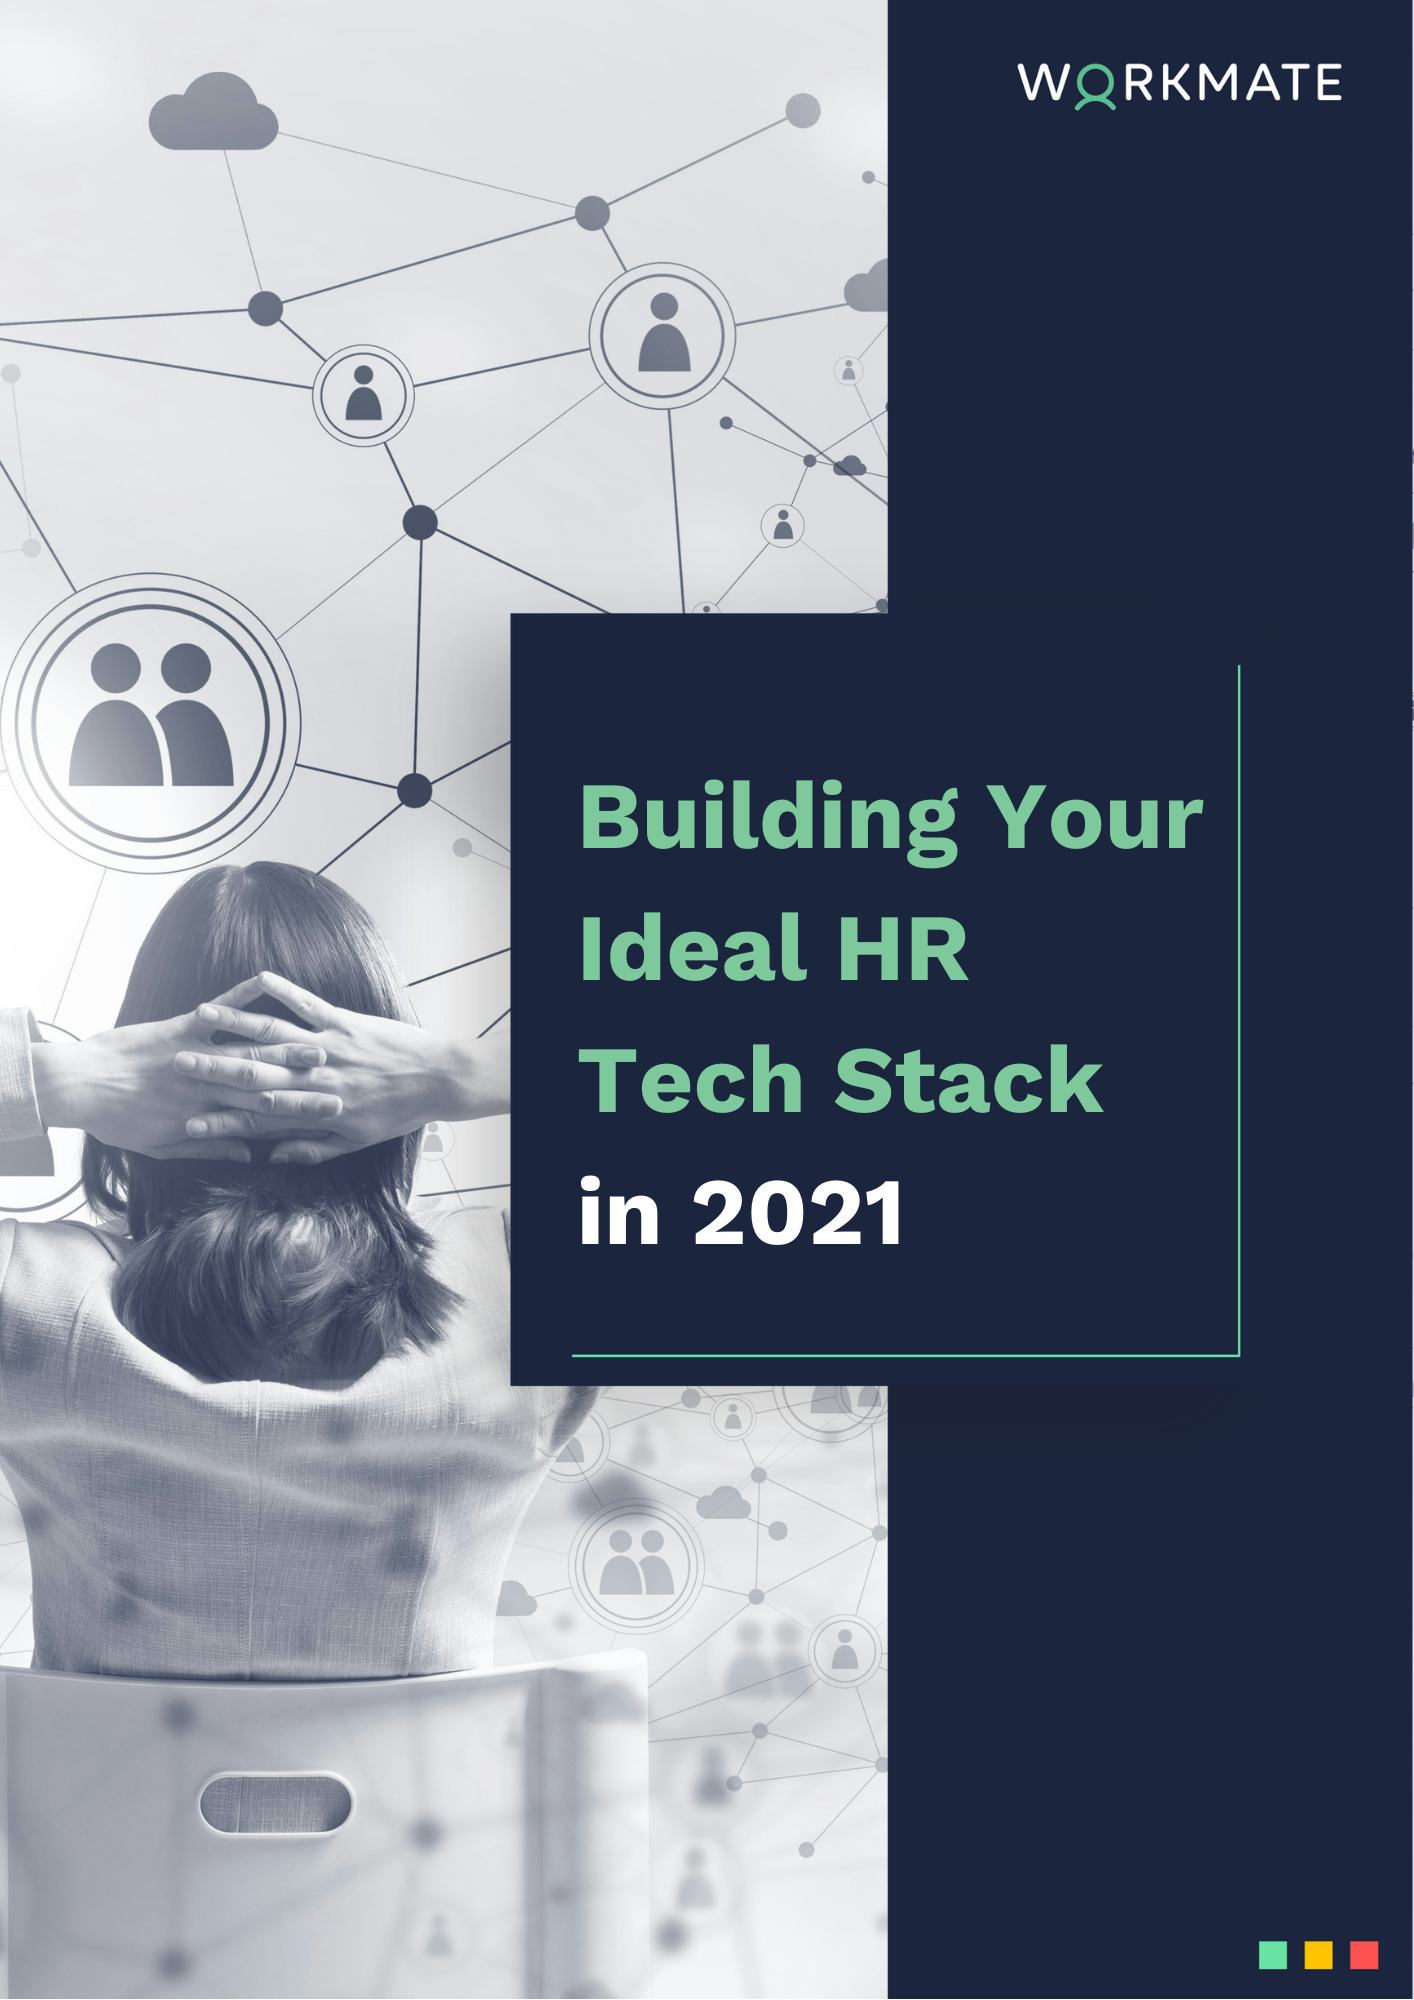 Ebook Ideal HR Tech Stack in 2021